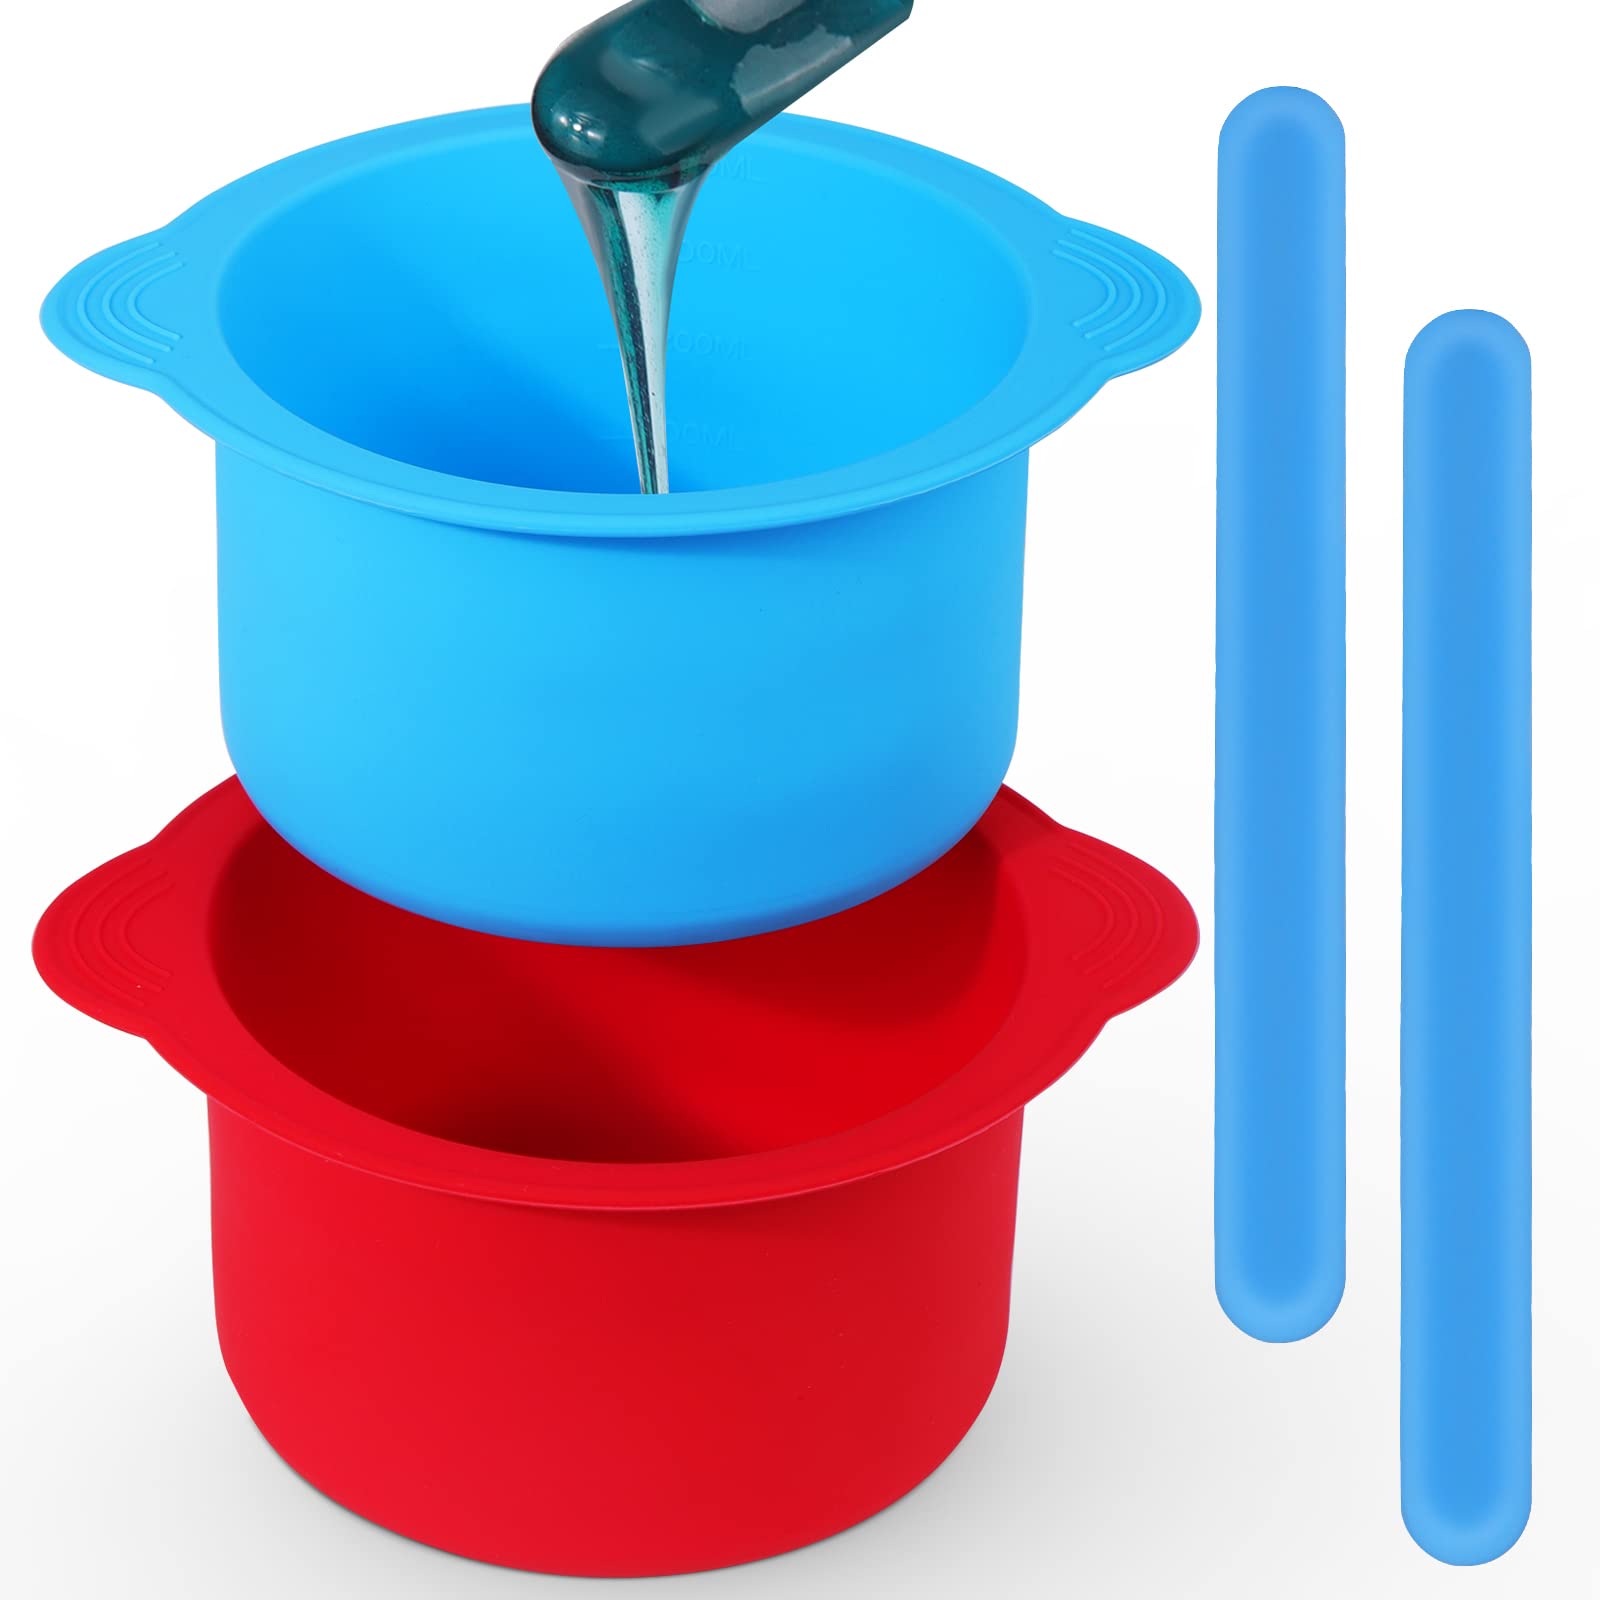 Butory 2pcs Silicone Wax Pot Set with Reusable Stirring Rods Non-Stick Silicone Waxing Spatulas Pot for Hard Wax Heater, Easy to Clean, Size: 1Set